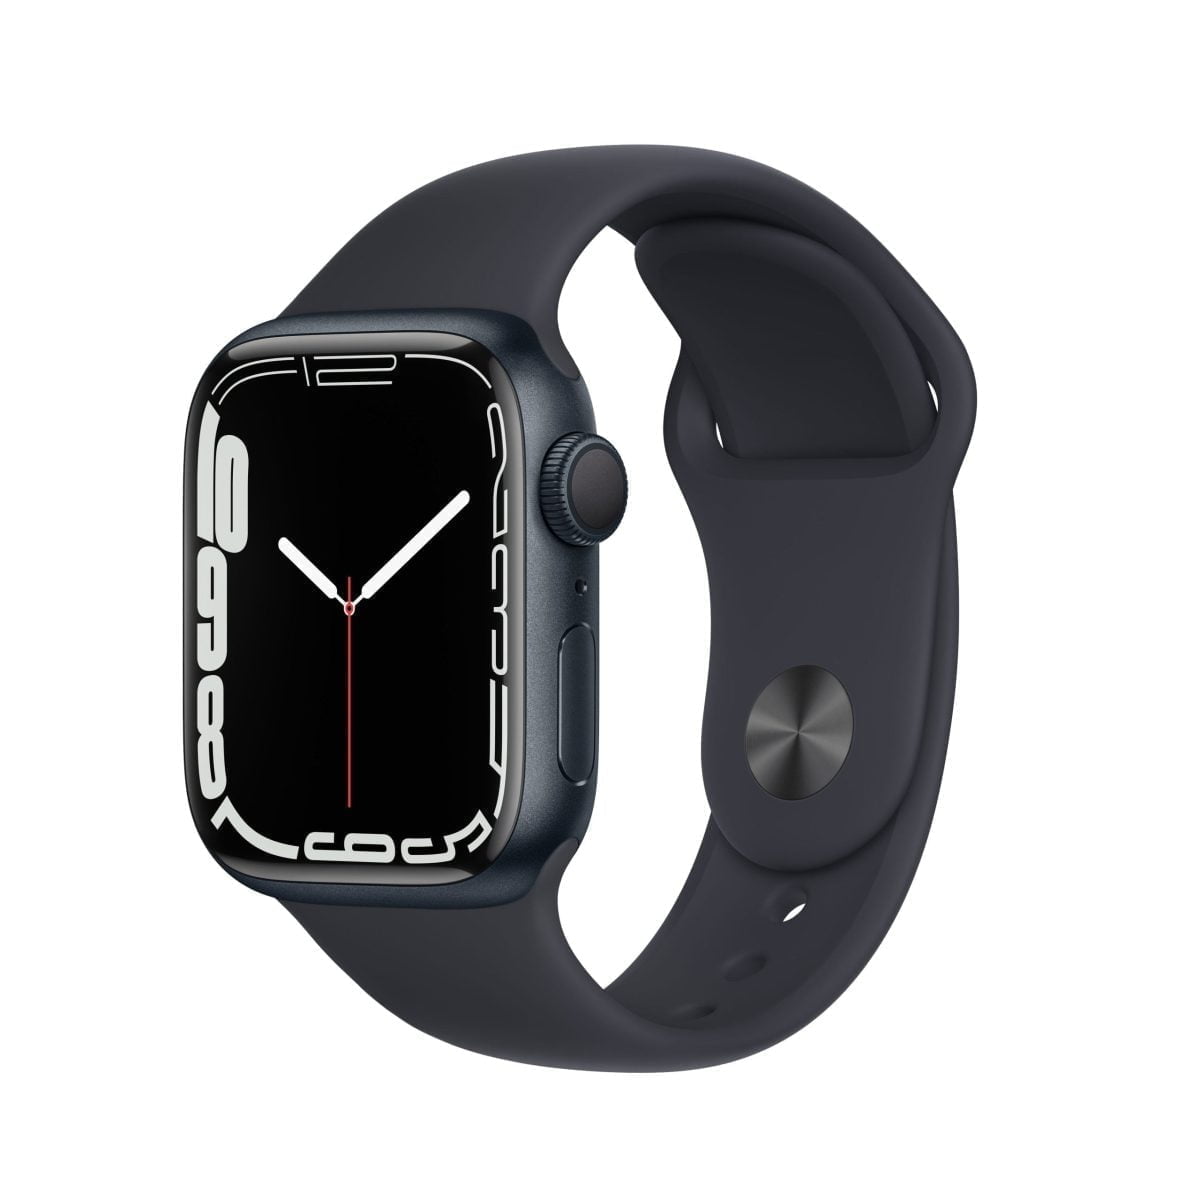 6215932 Sd Scaled Apple &Amp;Lt;H1&Amp;Gt;Apple Watch Series 7 (Gps) 41Mm Midnight Aluminum Case With Midnight Sport Band - Midnight&Amp;Lt;/H1&Amp;Gt; &Amp;Lt;H2&Amp;Gt;Model : Mkmx3&Amp;Lt;/H2&Amp;Gt; &Amp;Lt;Div Class=&Amp;Quot;Long-Description-Container Body-Copy &Amp;Quot;&Amp;Gt; &Amp;Lt;Div Class=&Amp;Quot;Html-Fragment&Amp;Quot;&Amp;Gt; &Amp;Lt;Div&Amp;Gt; &Amp;Lt;Div&Amp;Gt;The Largest, Most Advanced Always-On Retina Display Yet Makes Everything You Do With Your Apple Watch Series 7 Bigger And Better. Series 7 Is The Most Durable Apple Watch Ever Built, With An Even More Crack-Resistant Front Crystal. Advanced Features Let You Measure Your Blood Oxygen Level,¹ Take An Ecg Anytime,² And Access Mindfulness And Sleep Tracking Apps. You Can Also Track Dozens Of Workouts, Including New Tai Chi And Pilates.&Amp;Lt;/Div&Amp;Gt; &Amp;Lt;/Div&Amp;Gt; &Amp;Lt;/Div&Amp;Gt; &Amp;Lt;/Div&Amp;Gt; Apple Watch Series Apple Watch Series 7 (Gps) 41Mm - Midnight